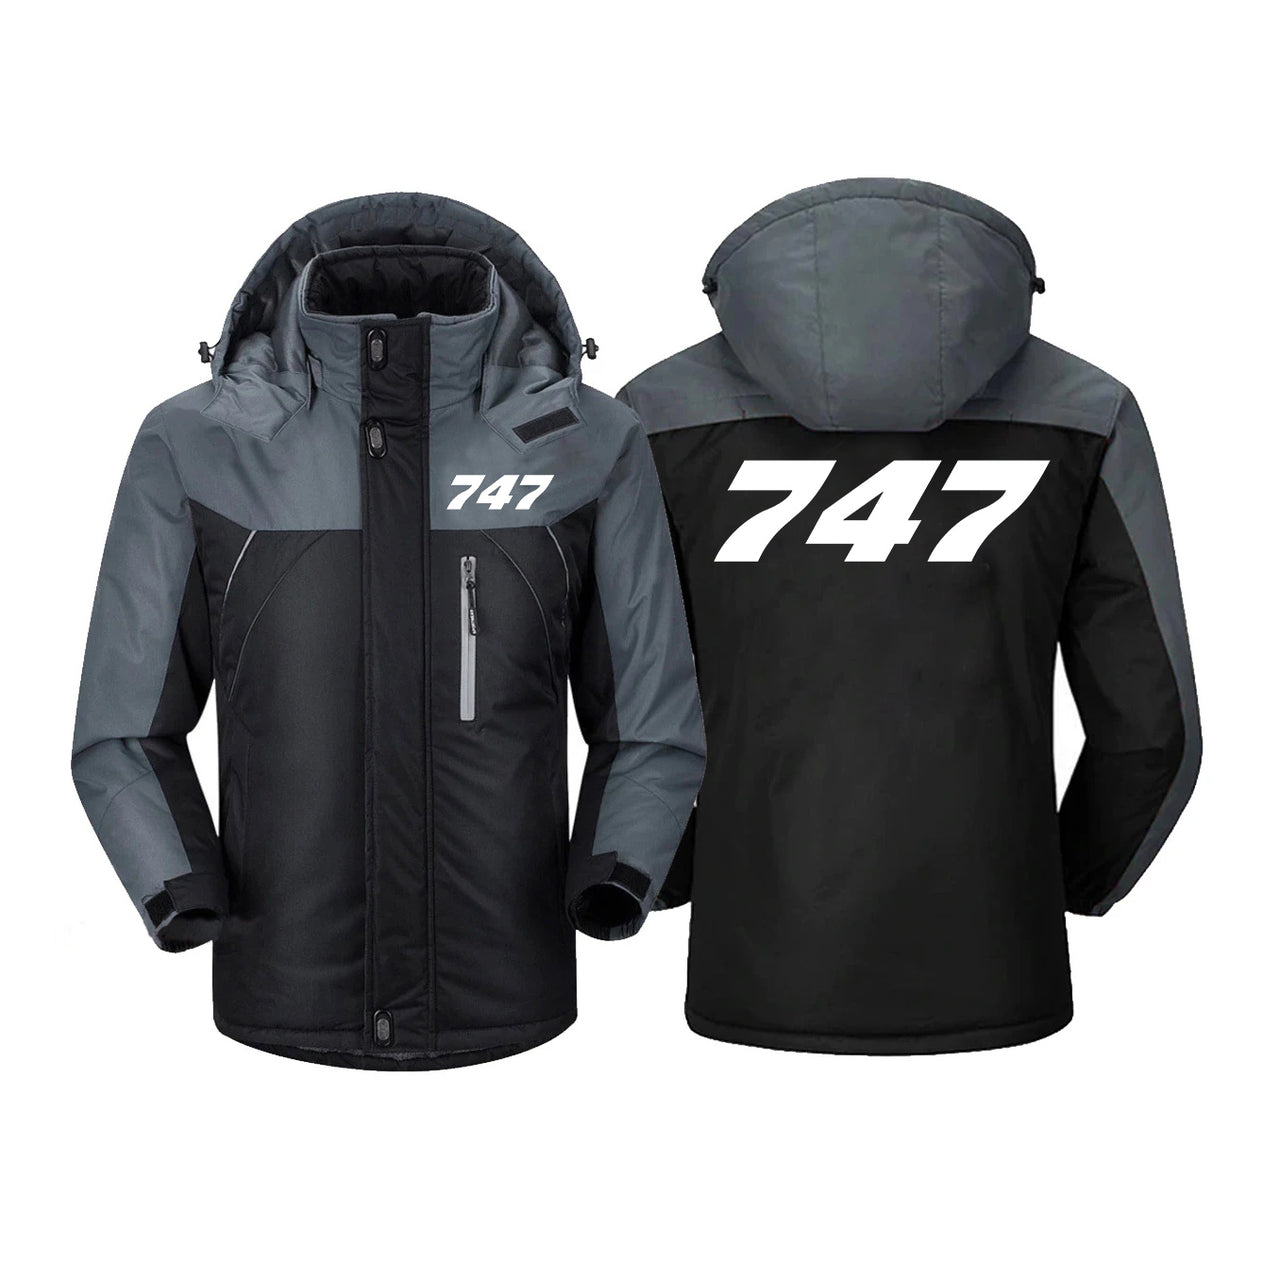 747 Flat Text Designed Thick Winter Jackets